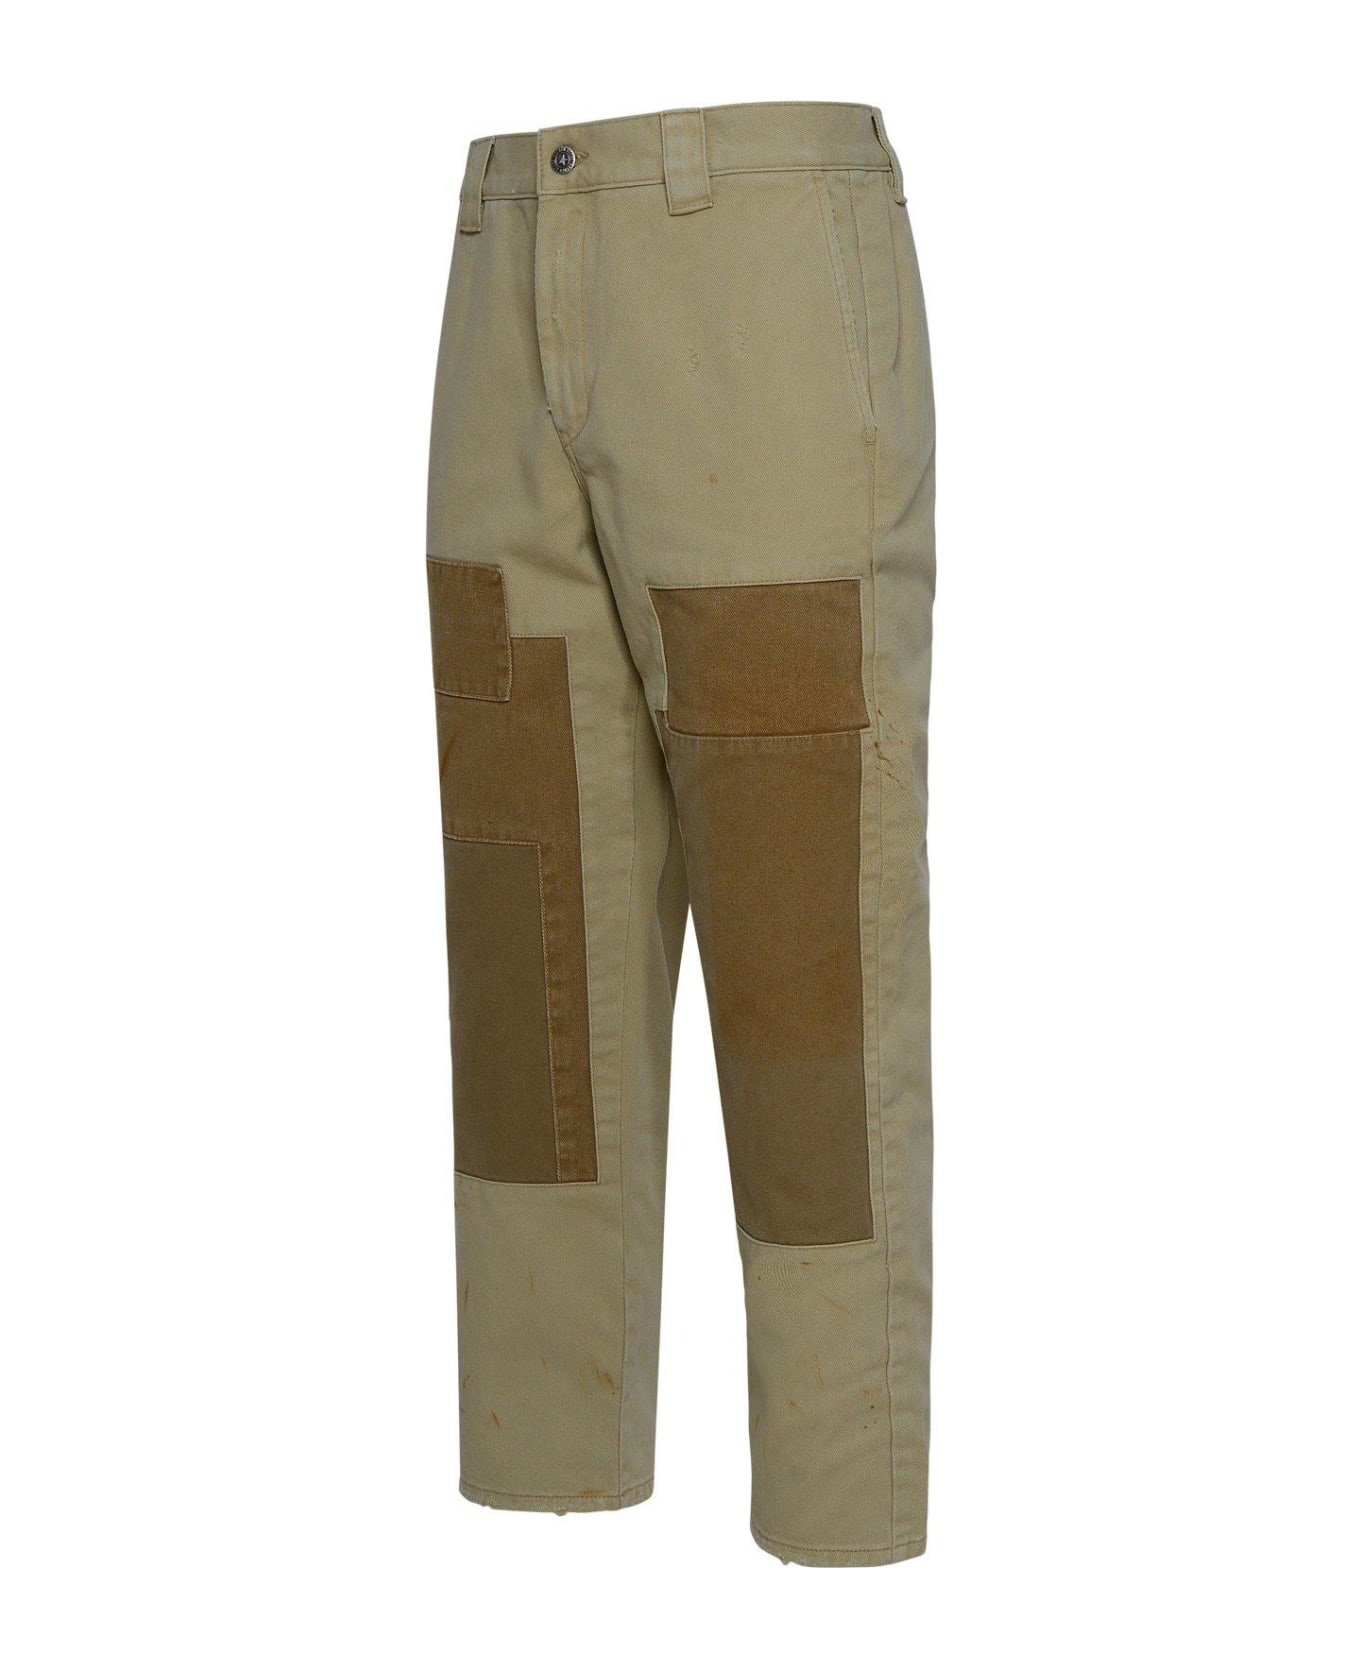 Golden Goose Panlled Trousers - Yellow Cream ボトムス